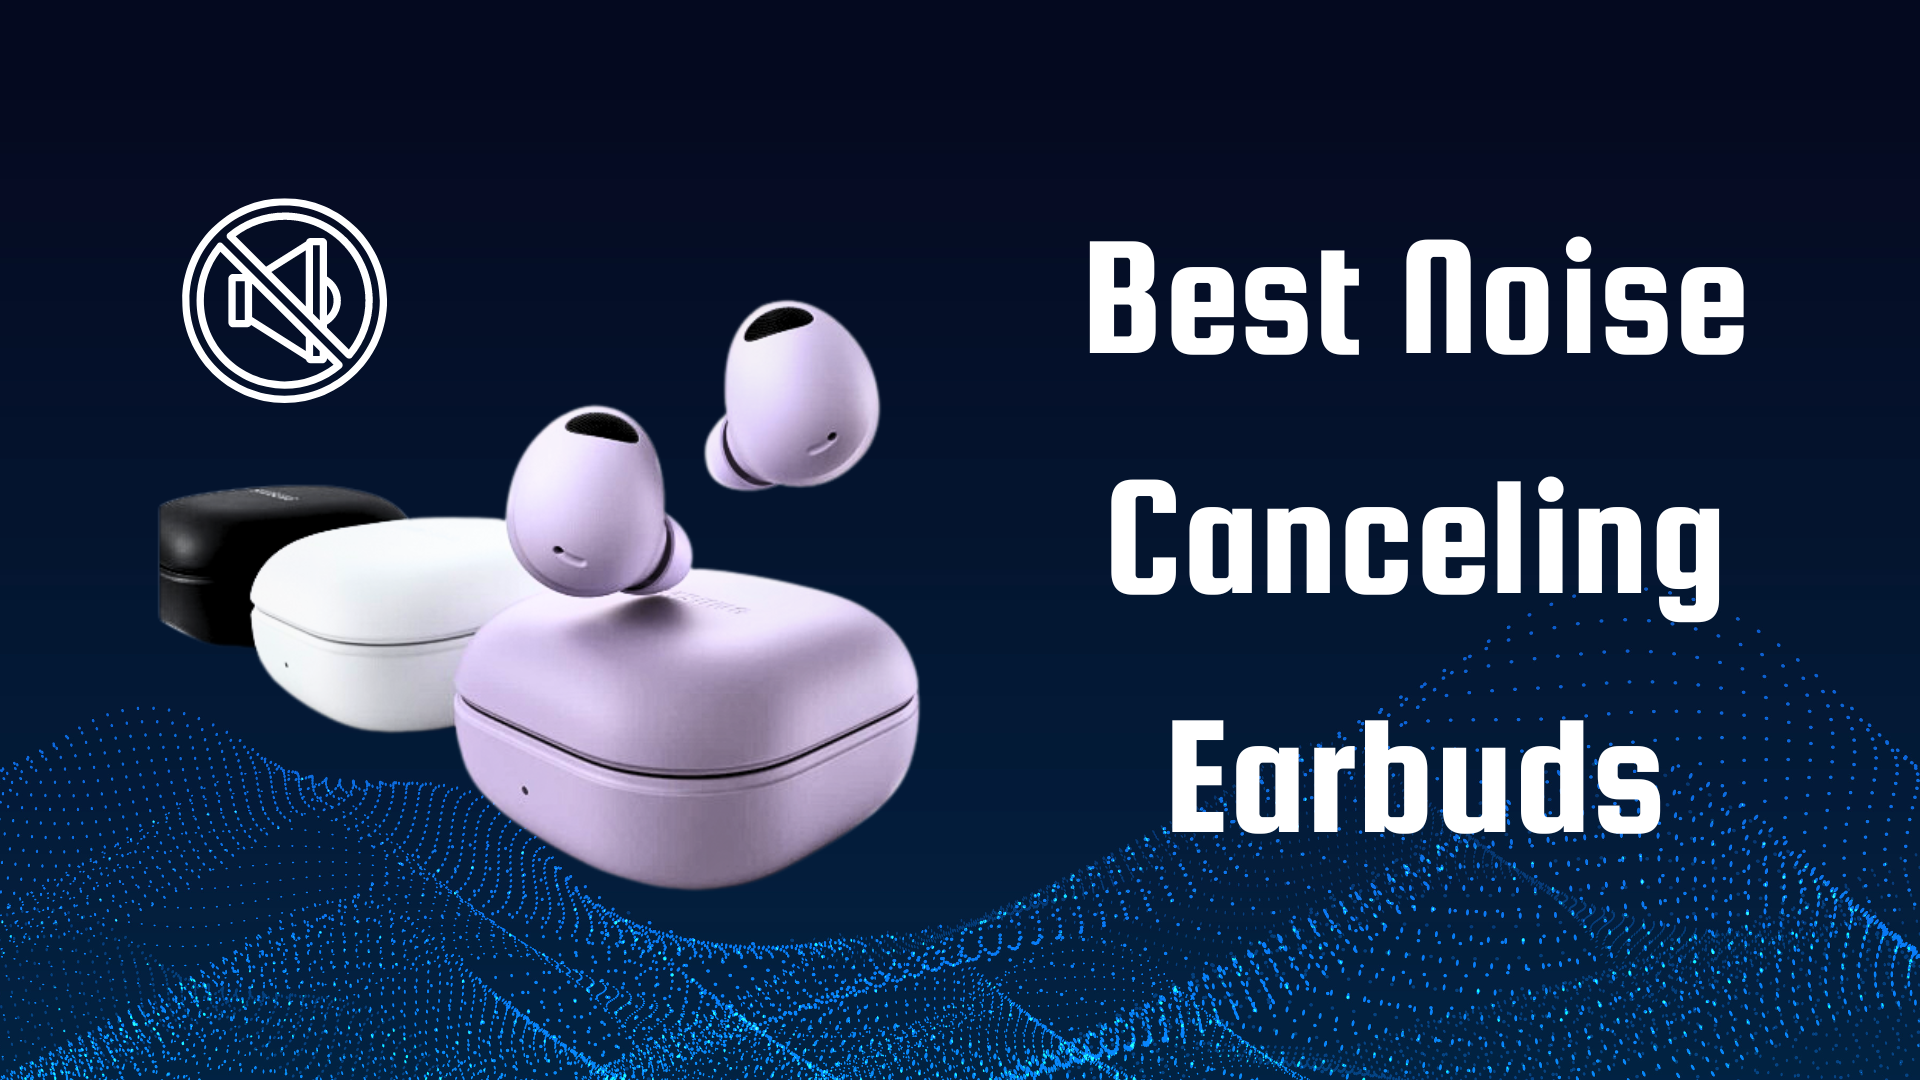 Best Noise Canceling Earbuds